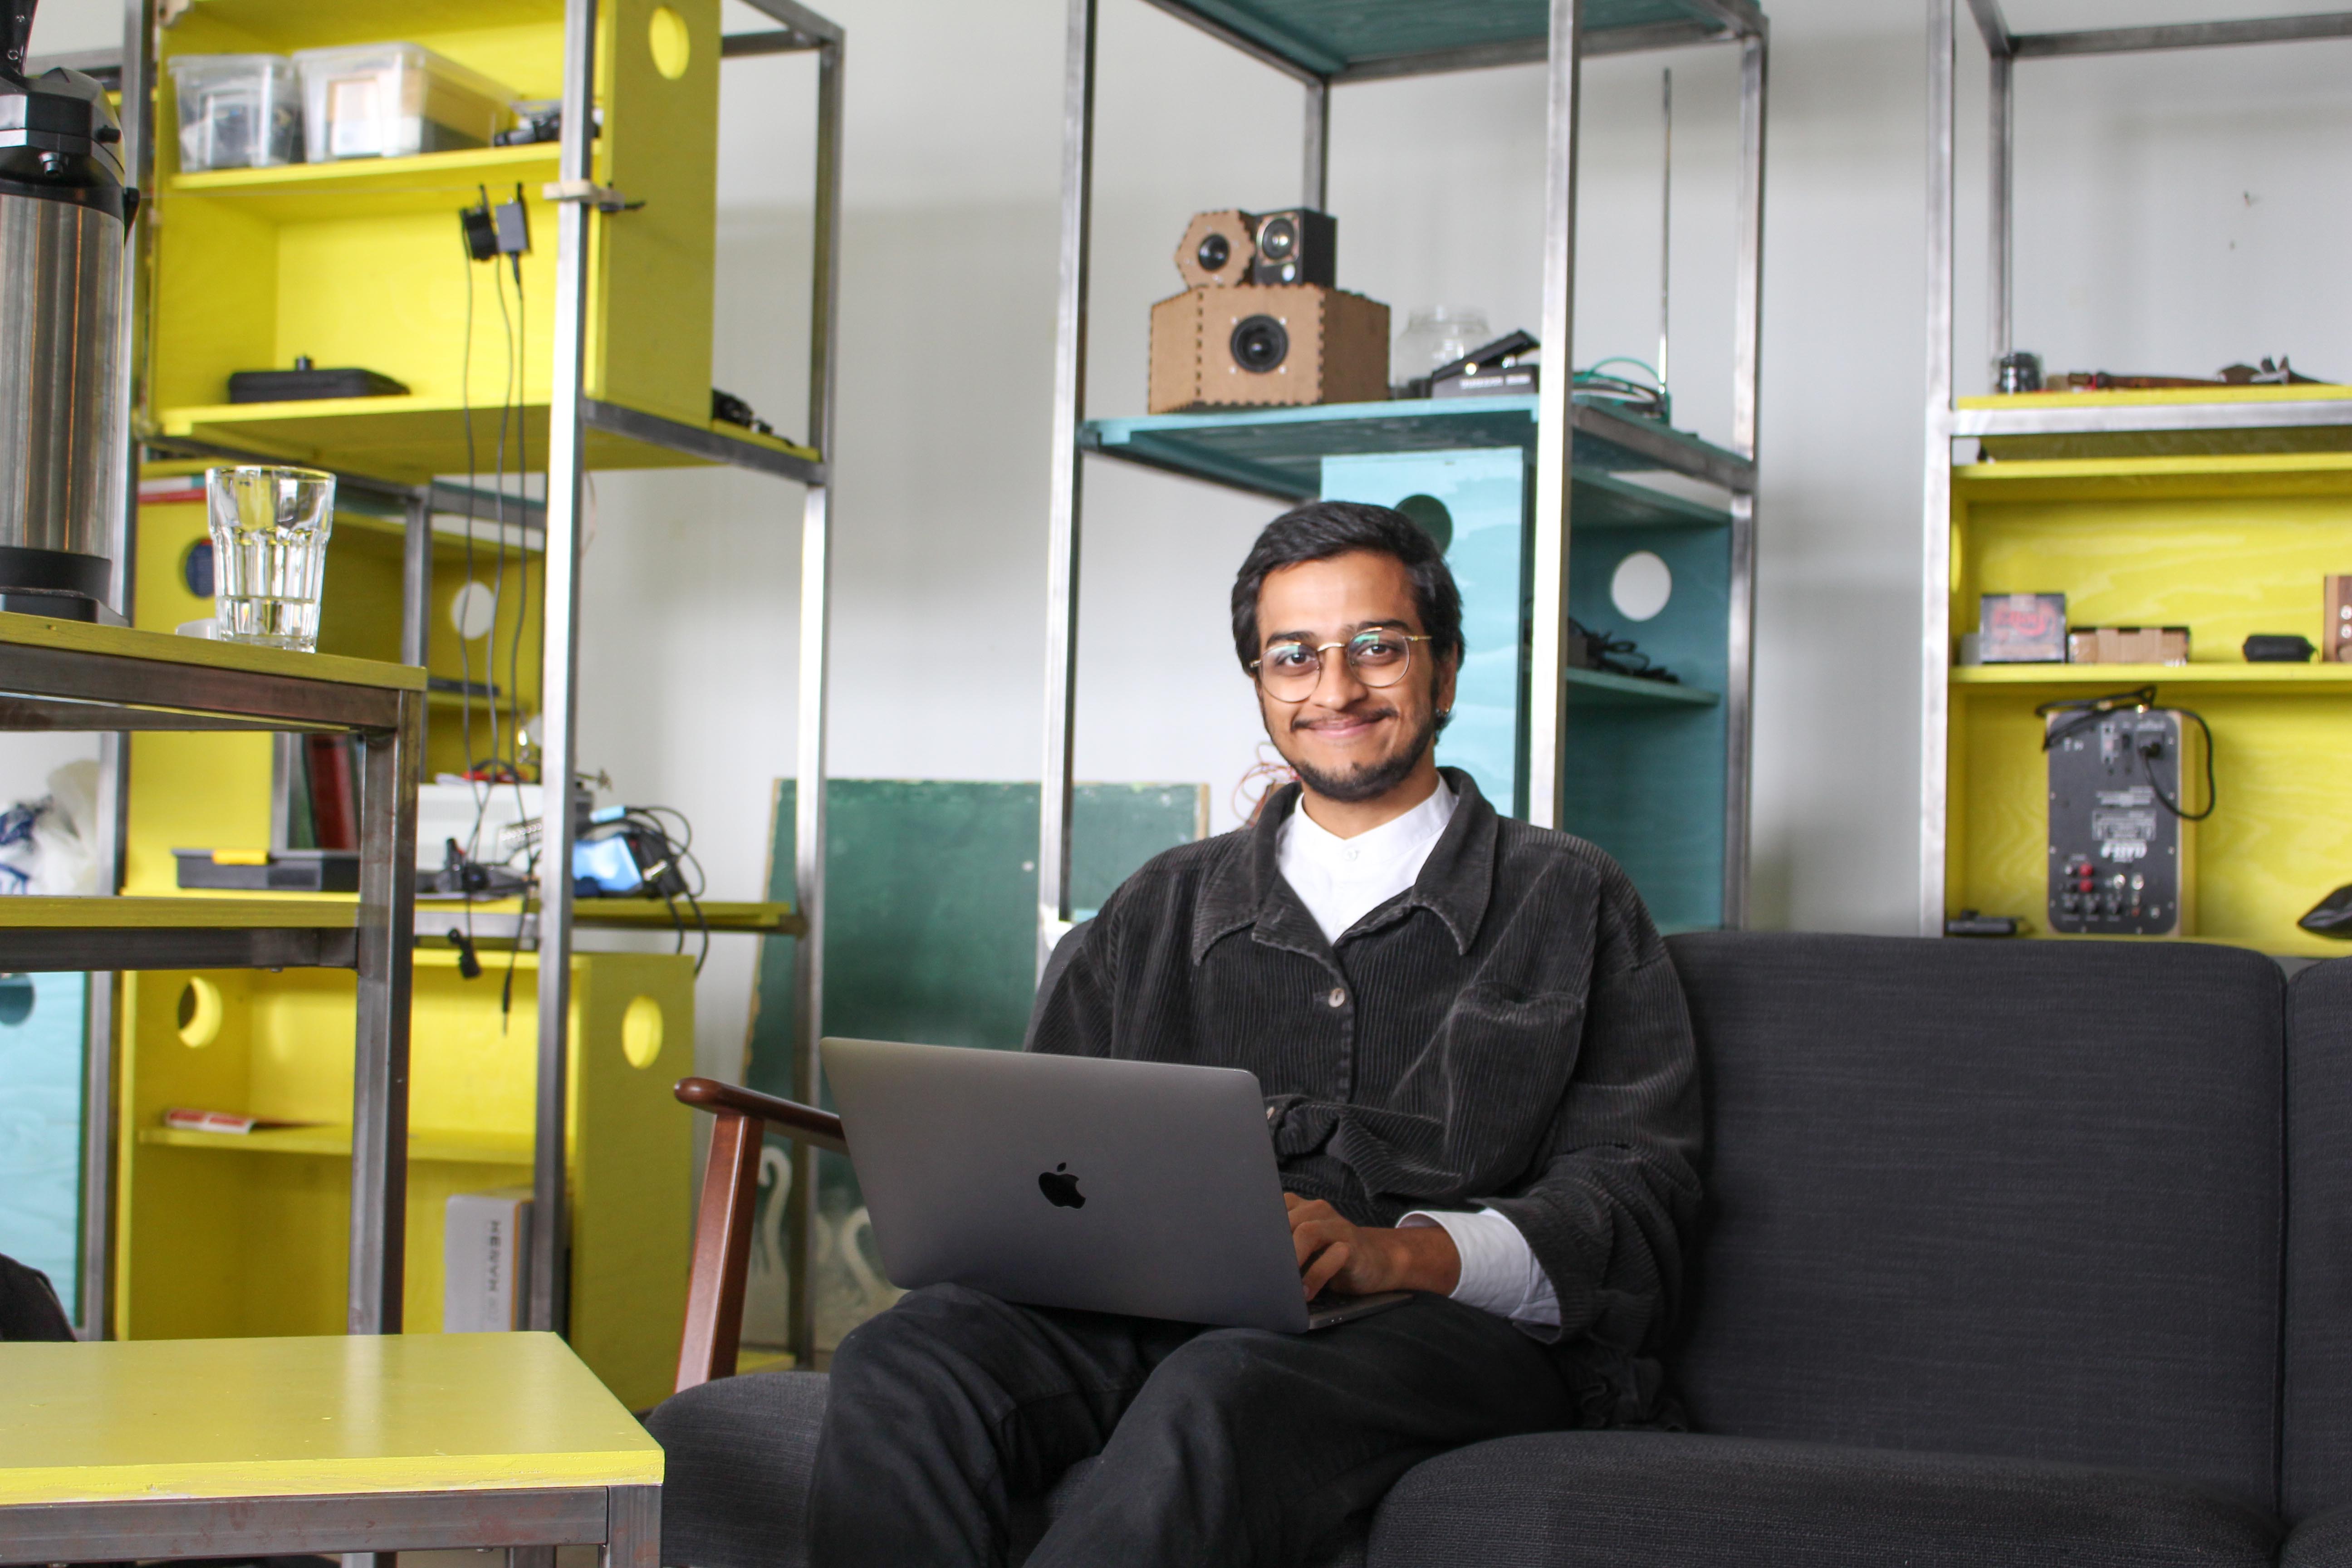 Young man sitting in a gray couch with a laptop, in front of a yellow shelving system.